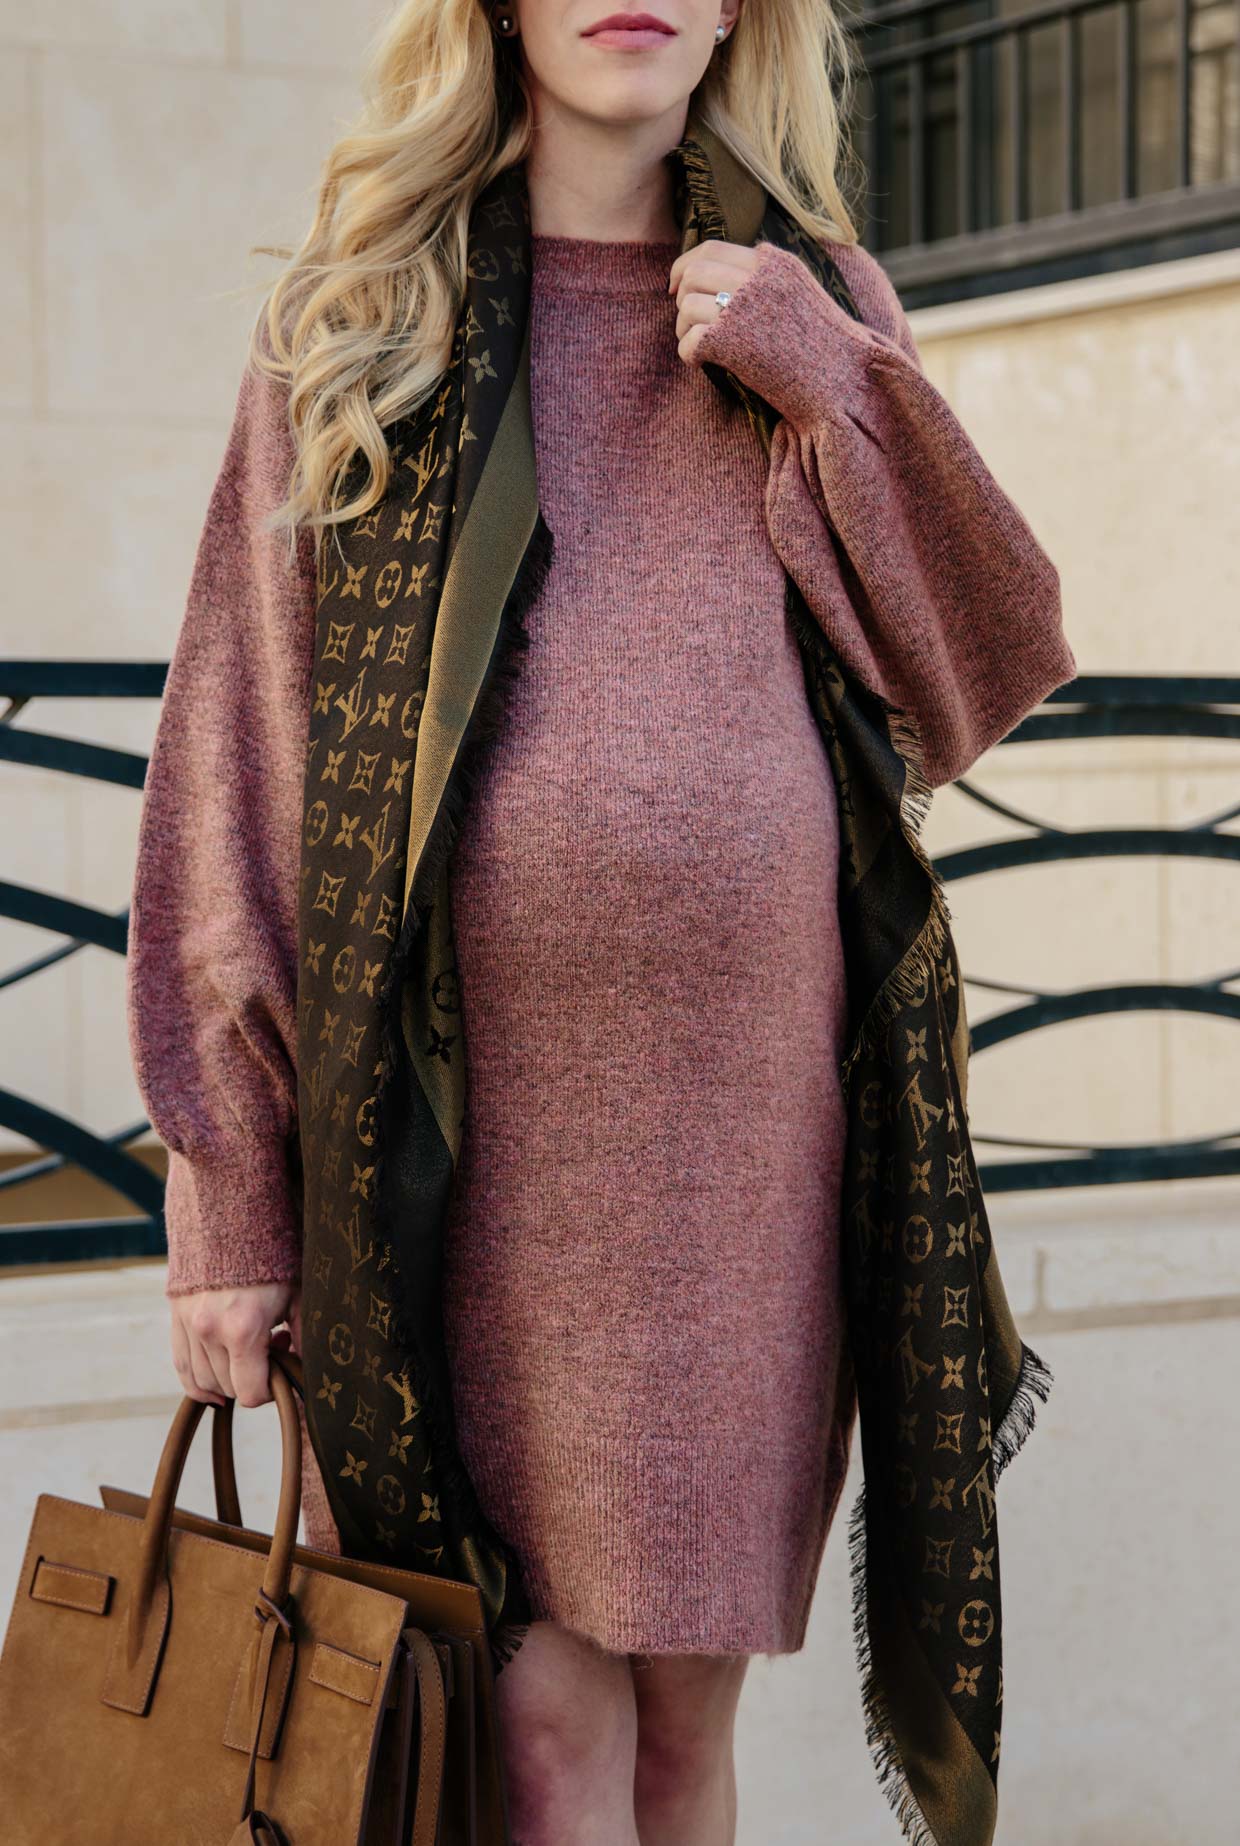 How to wear a sweater dress for fall maternity style, Topshop